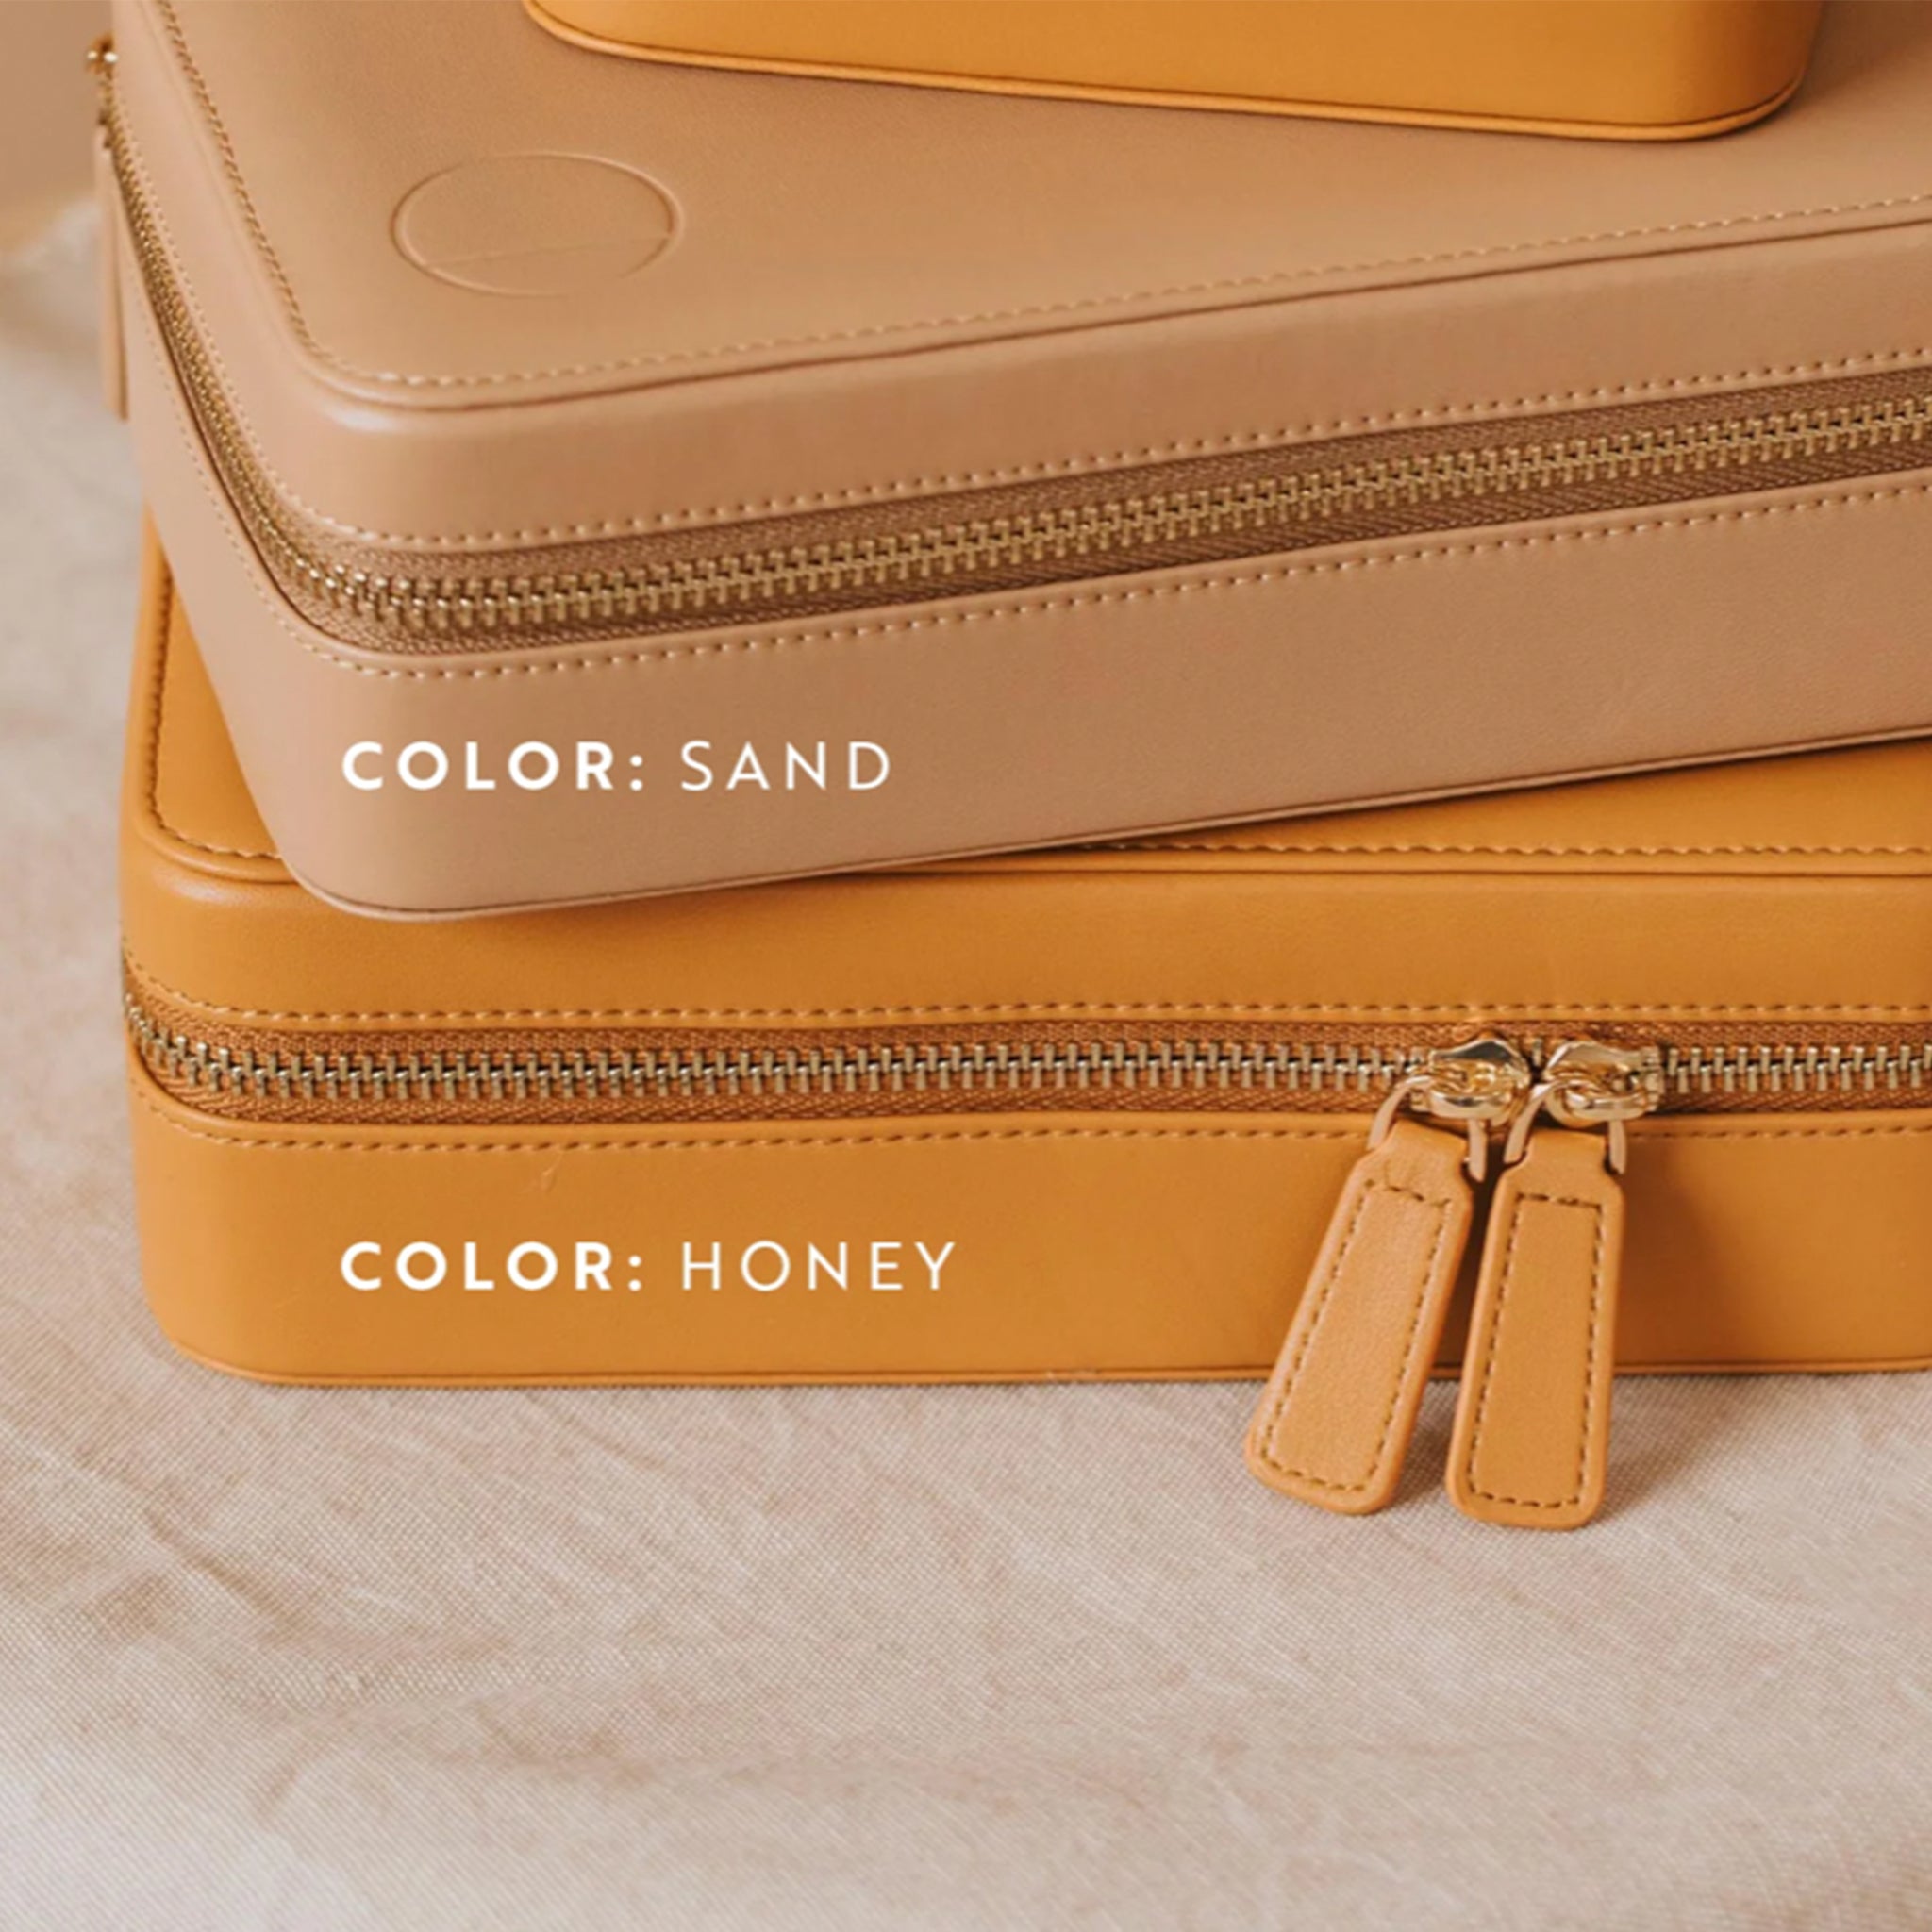 The sand travel jewelry case with a double zipper on top of a different colored case